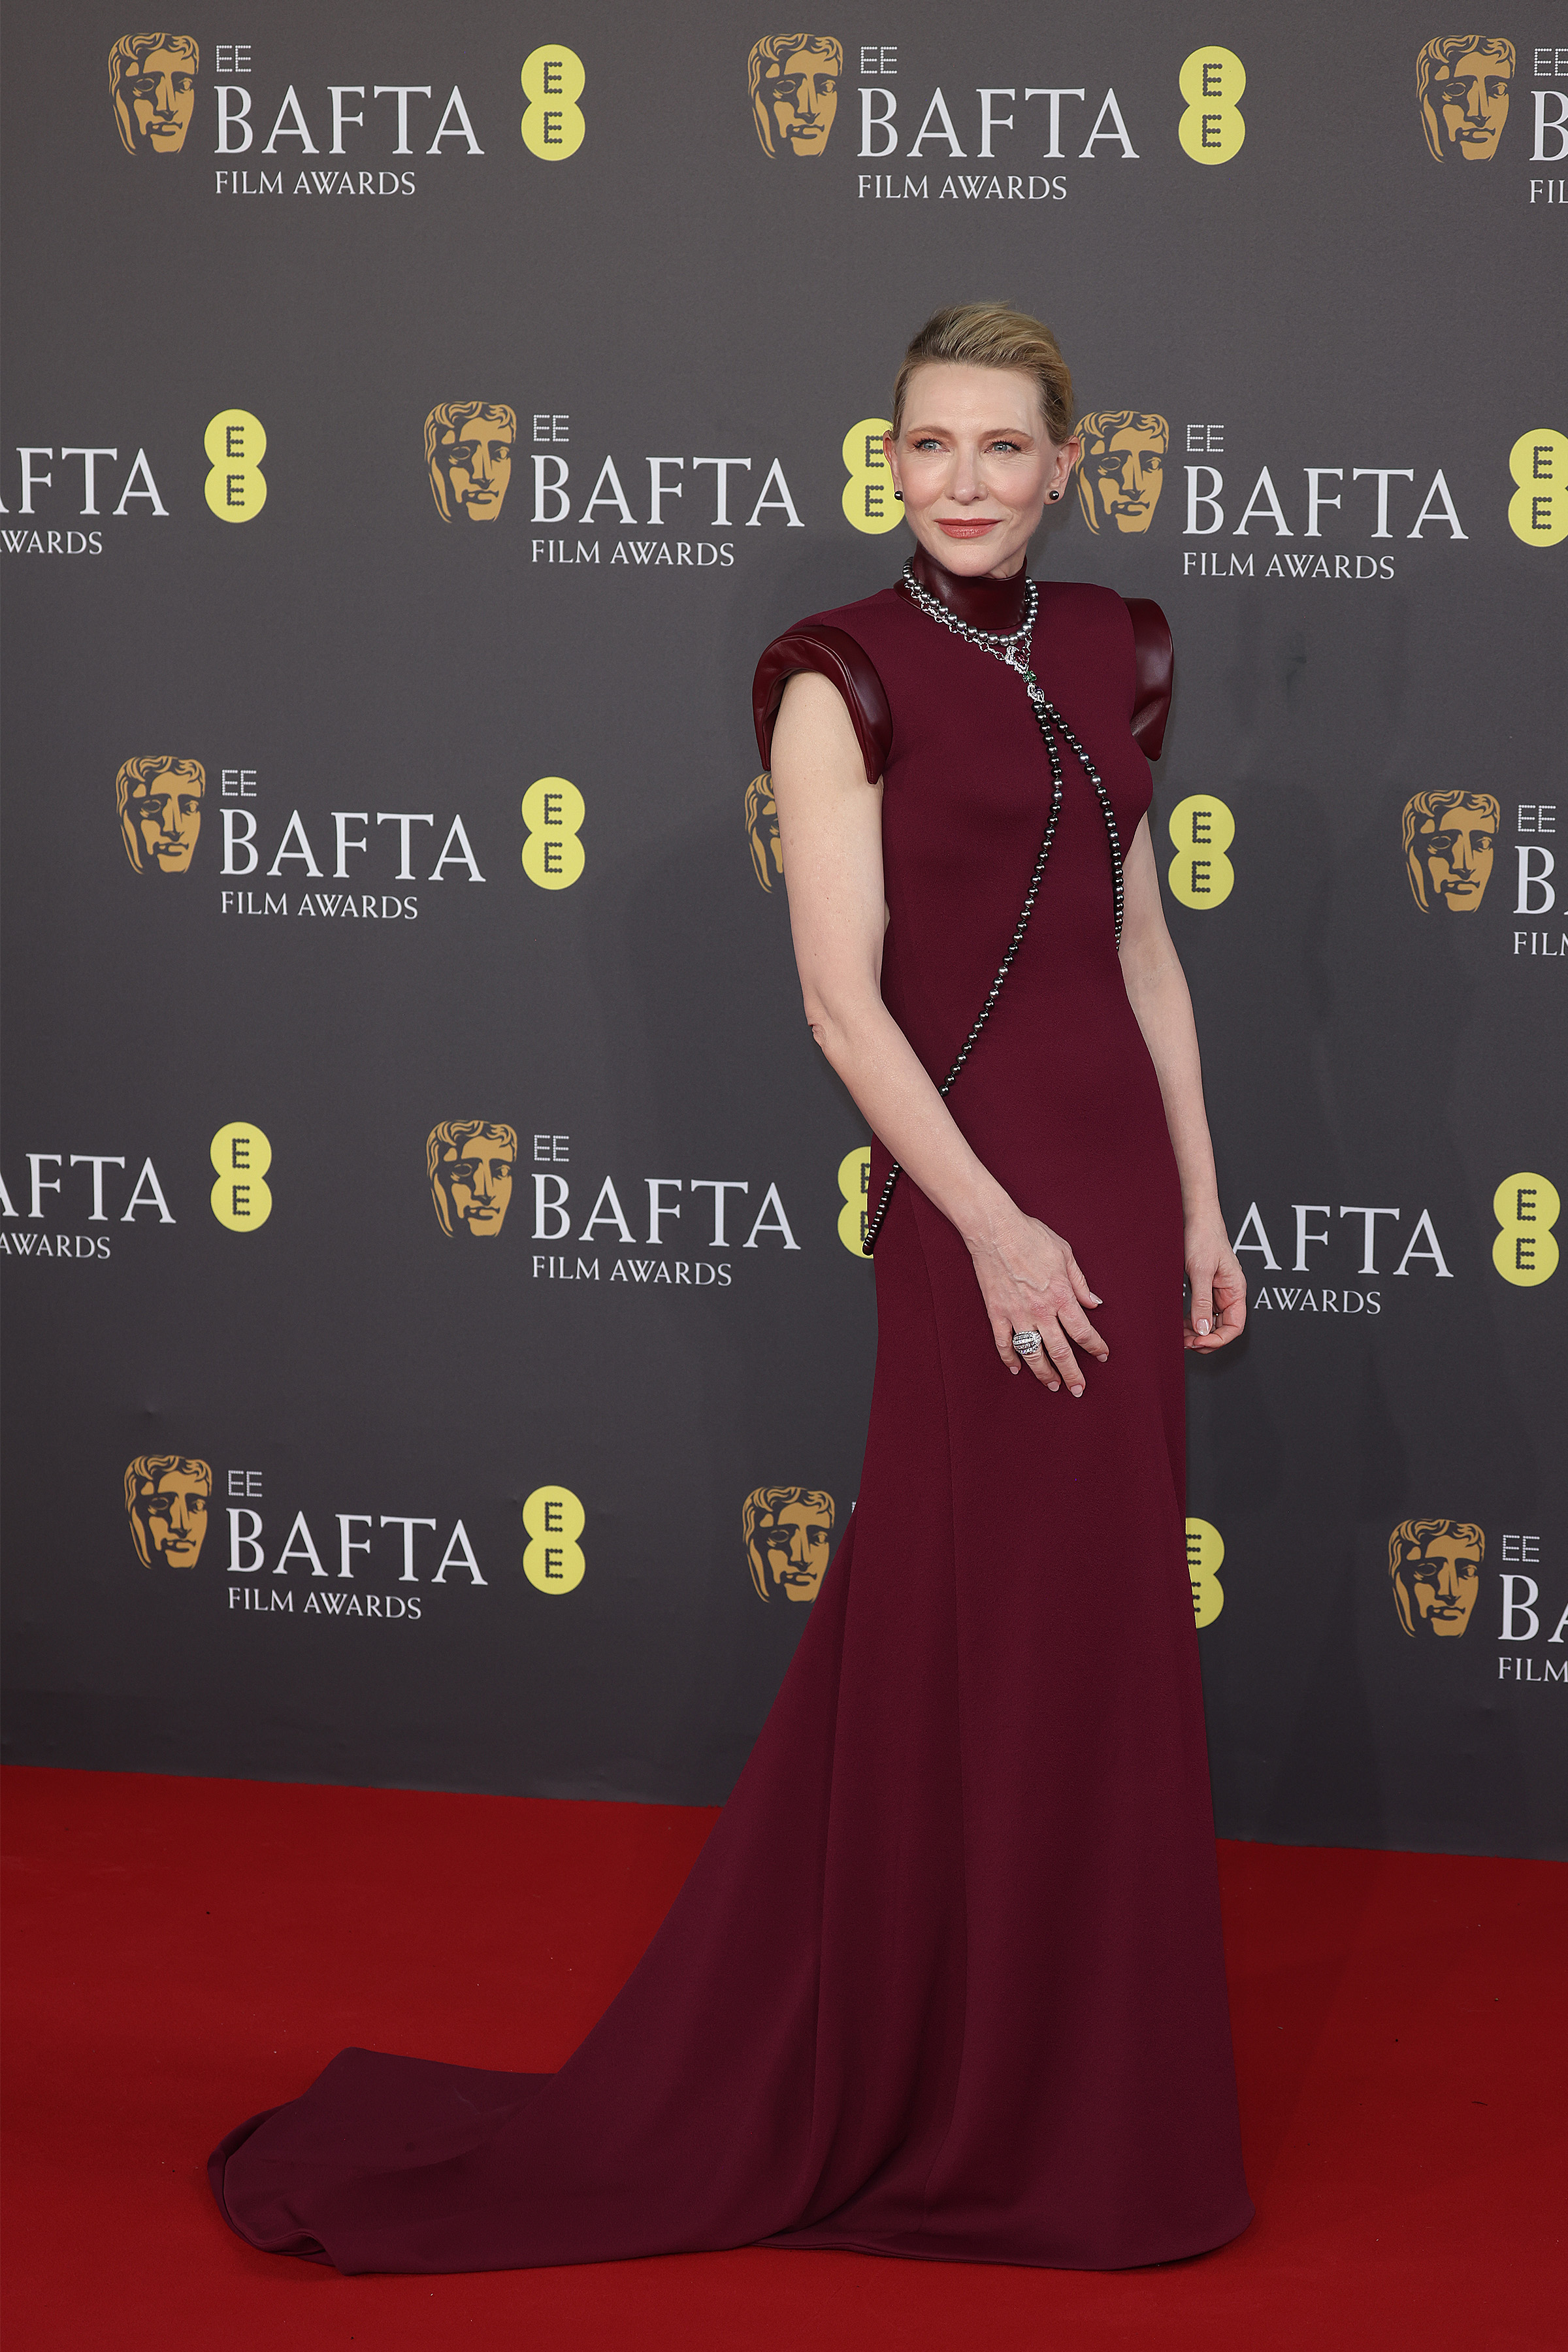 Cate Blanchett wearing a burgundy dress on the red carpet